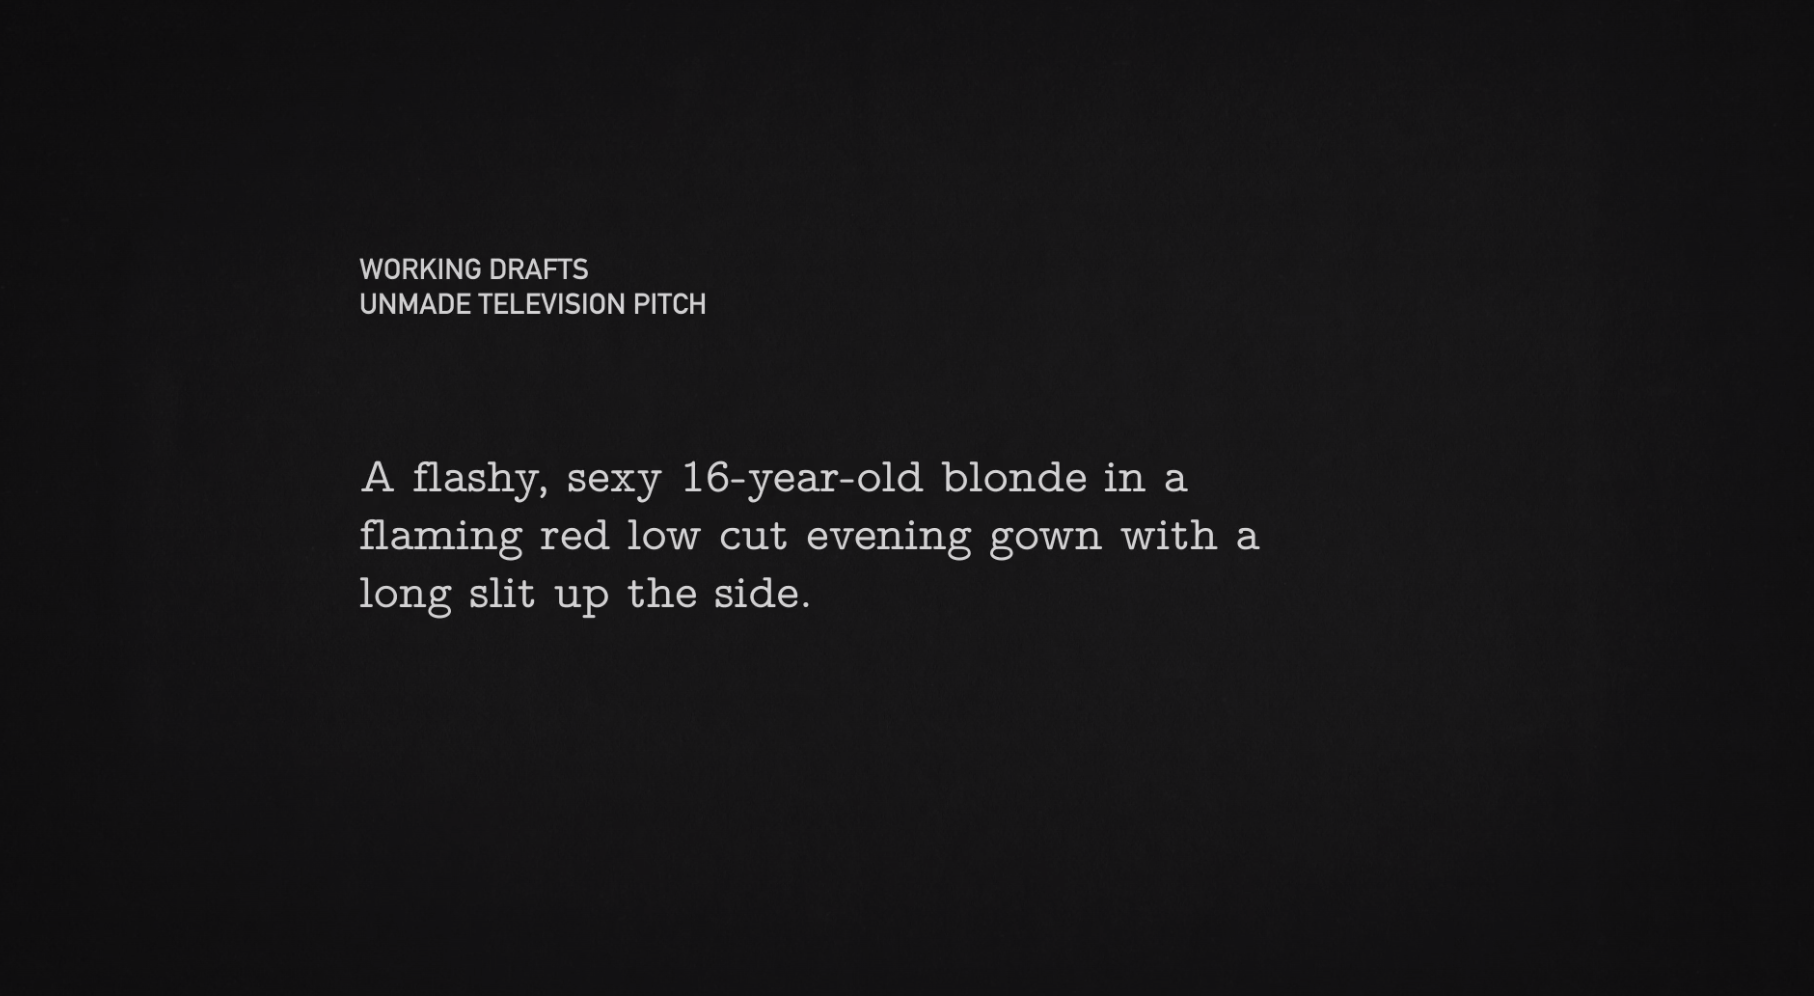 A title card about one of Woody Allen&#x27;s working drafts that says, &quot;A flashy, sexy 16-year-old blonde in a flaming red low cut evening gown with a long slit up the side&quot;